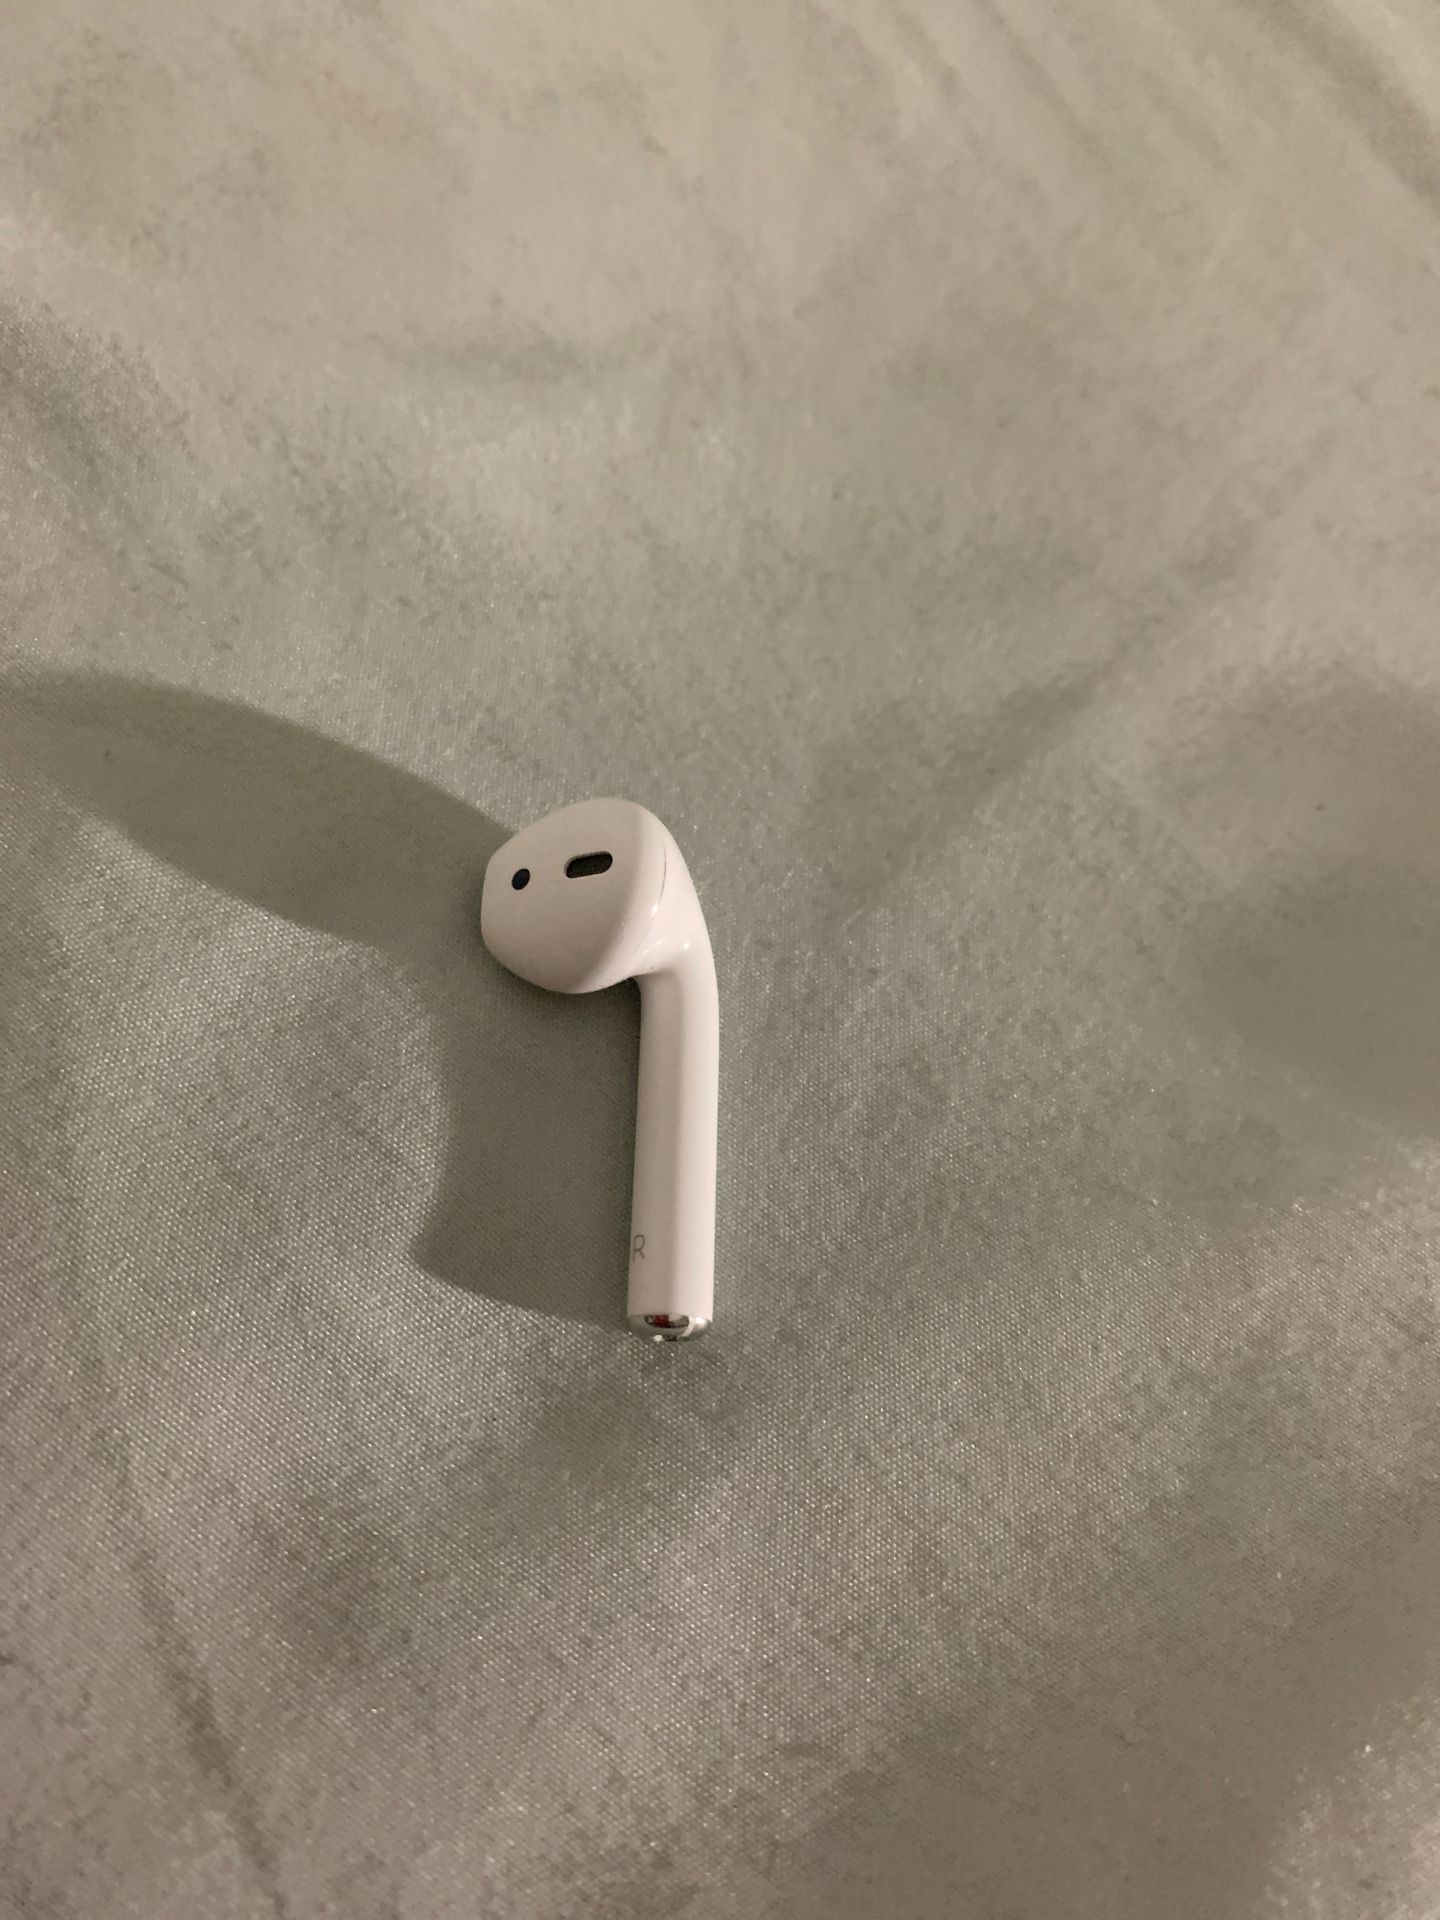 Authentic Apple AirPods 2 generation Right Side cleaned and sanitized cash pick up Bronx